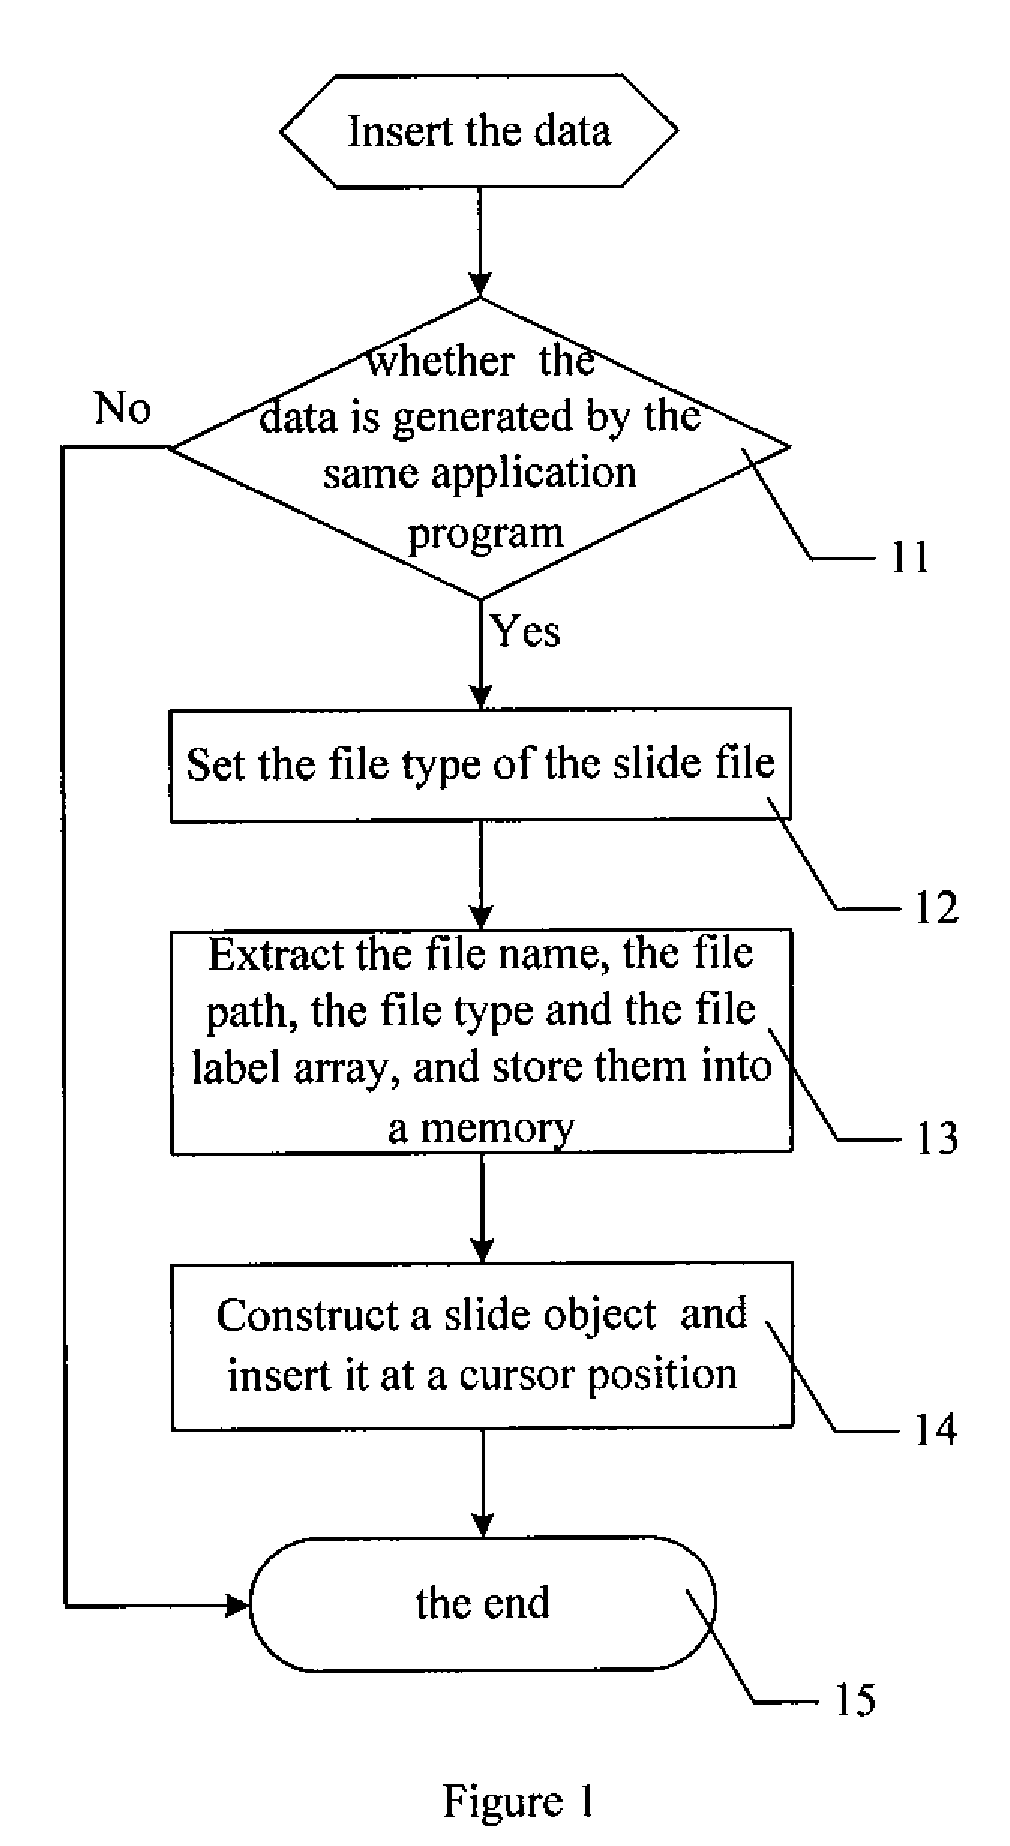 Method for Inserting and Broadcasting Slides in a Document